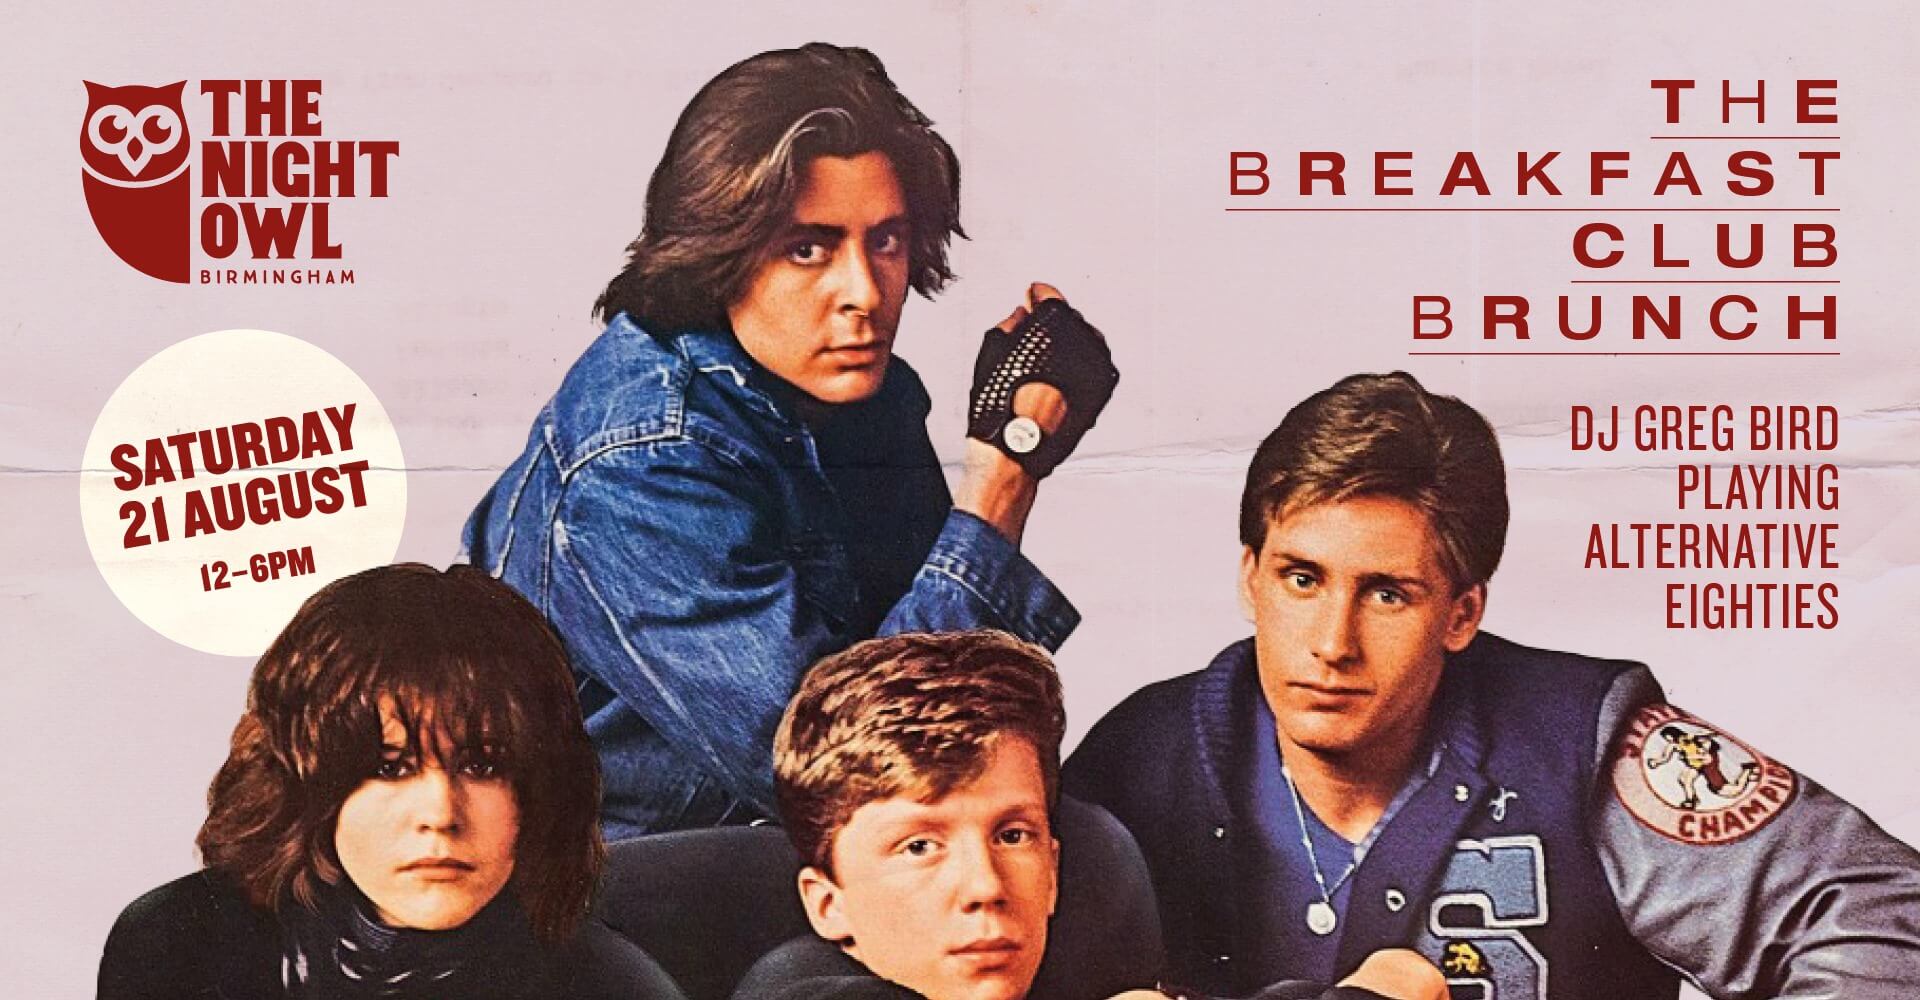 The Breakfast Club Brunch At The Night Owl - Poster